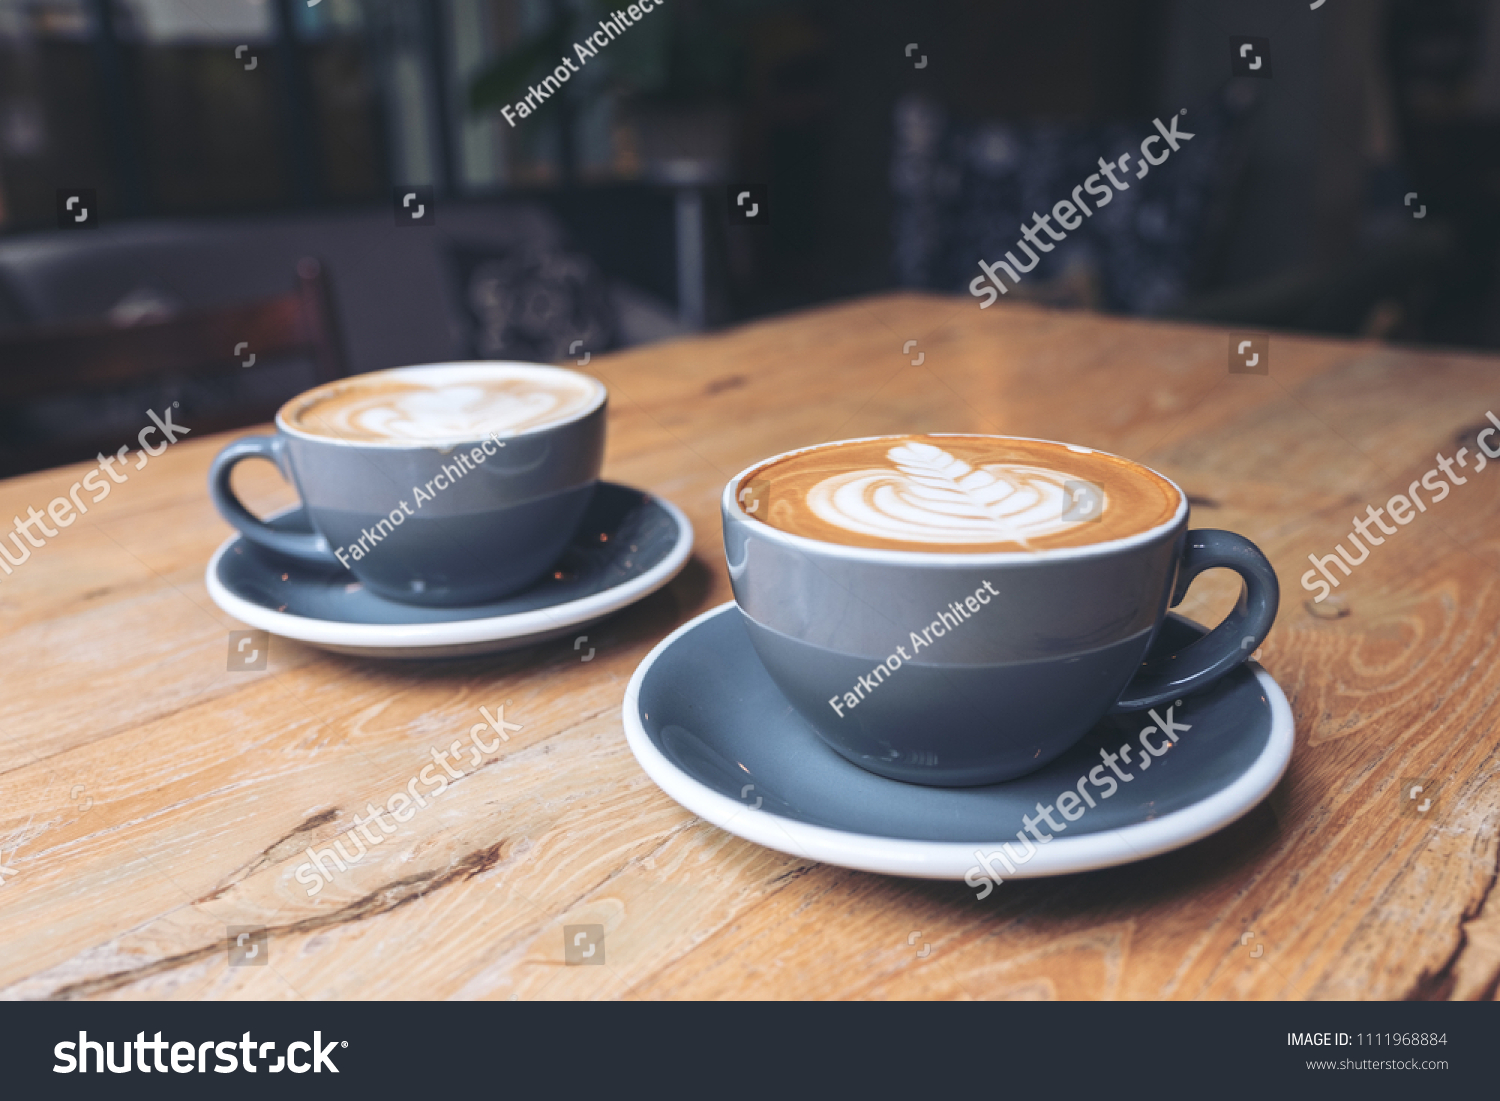 Closeup image of two blue cups of hot latte coffee on vintage wooden table in cafe #1111968884